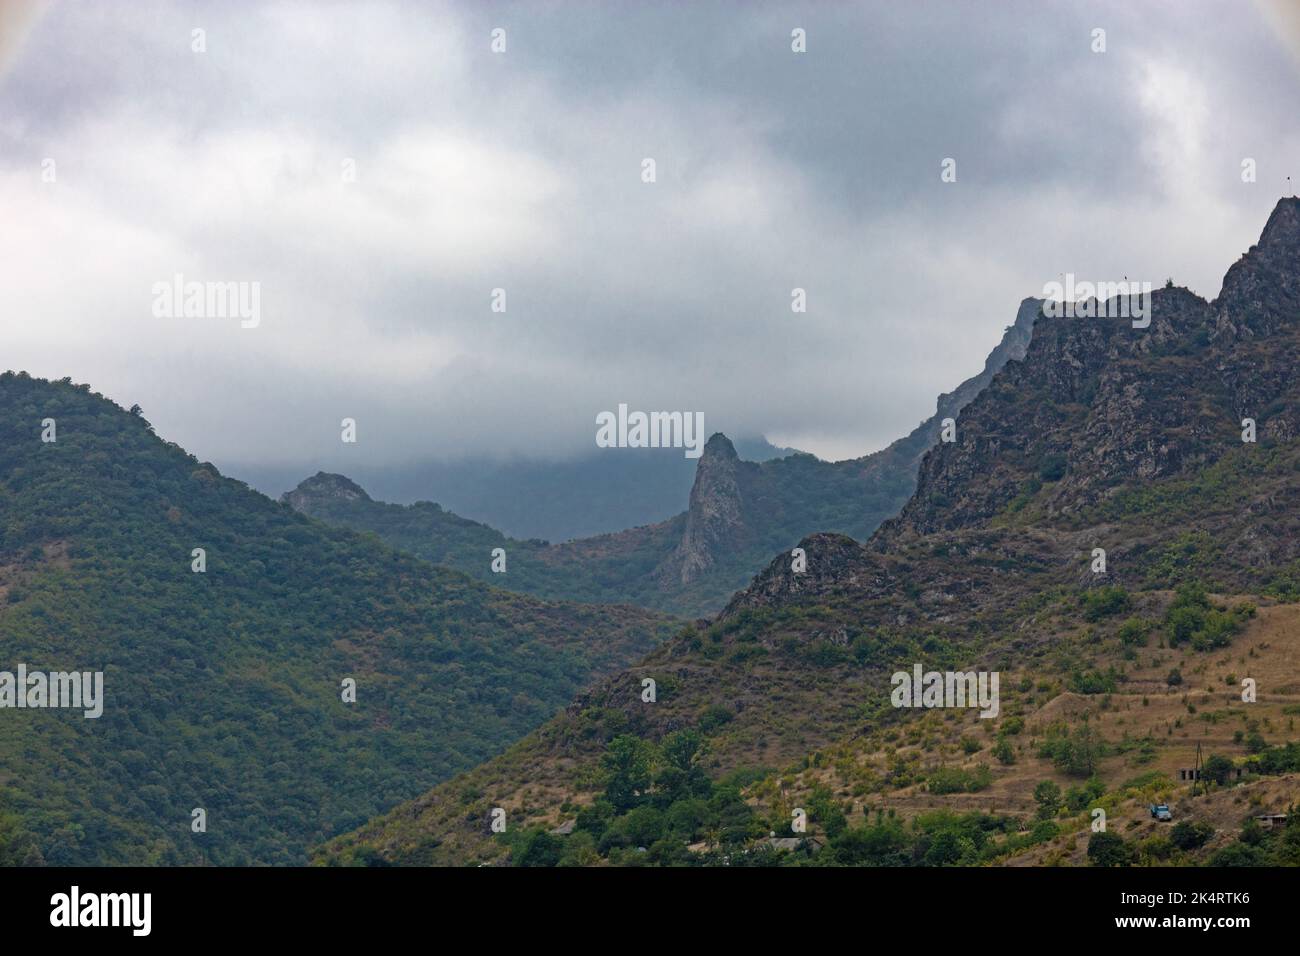 Mountains covered with forest on a foggy day, under low hanging clouds, in summer Stock Photo